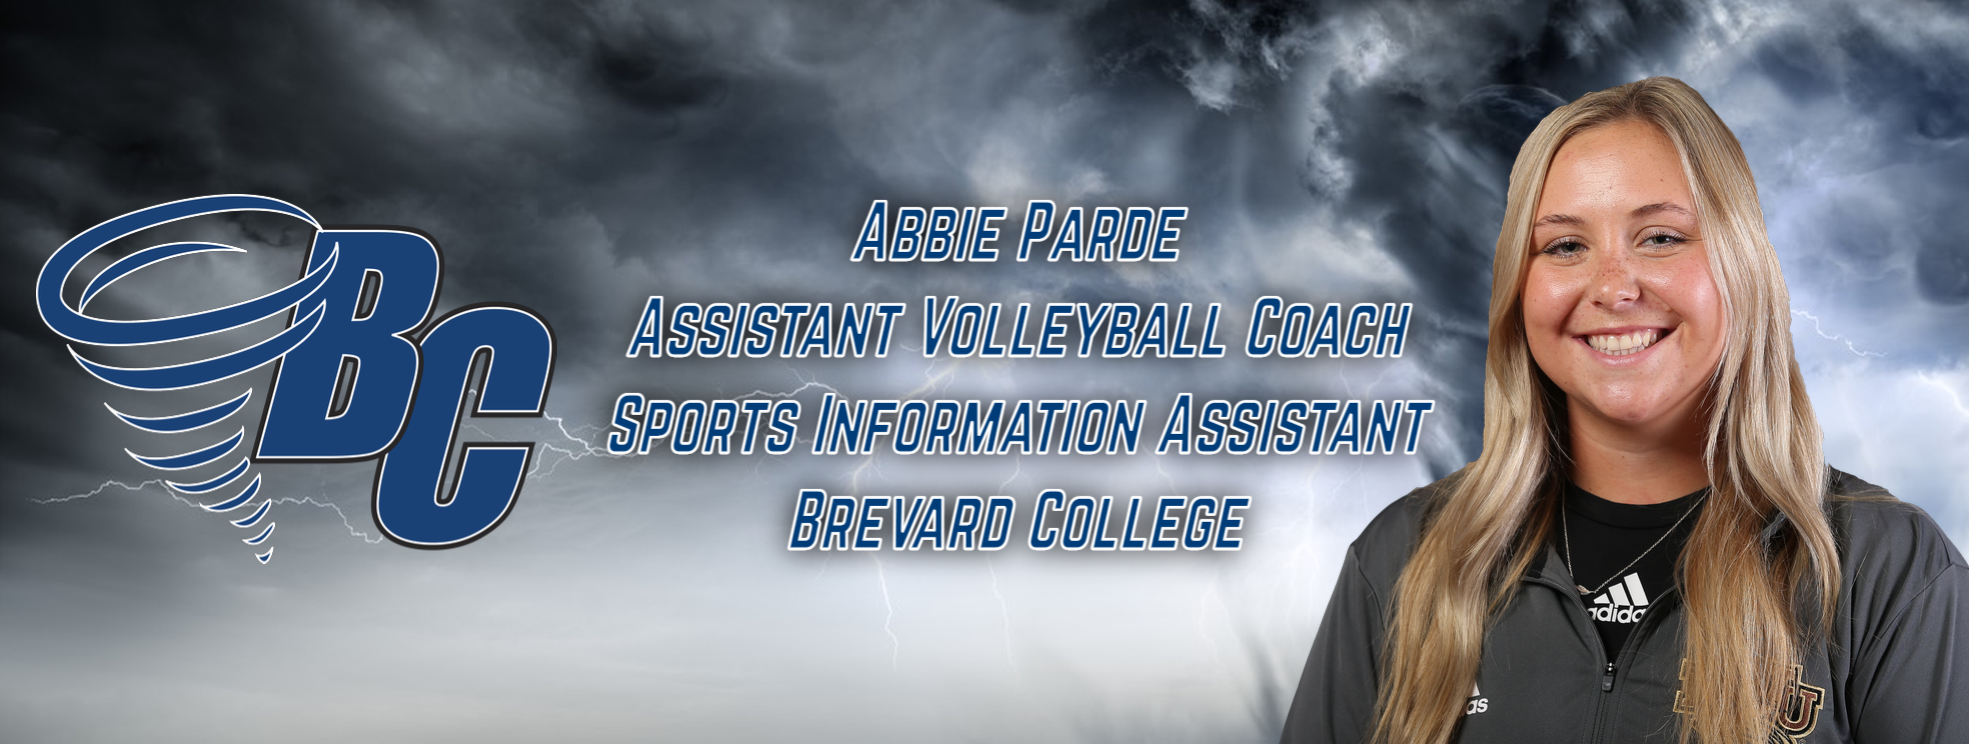 Parde Named Brevard College Assistant Volleyball Coach